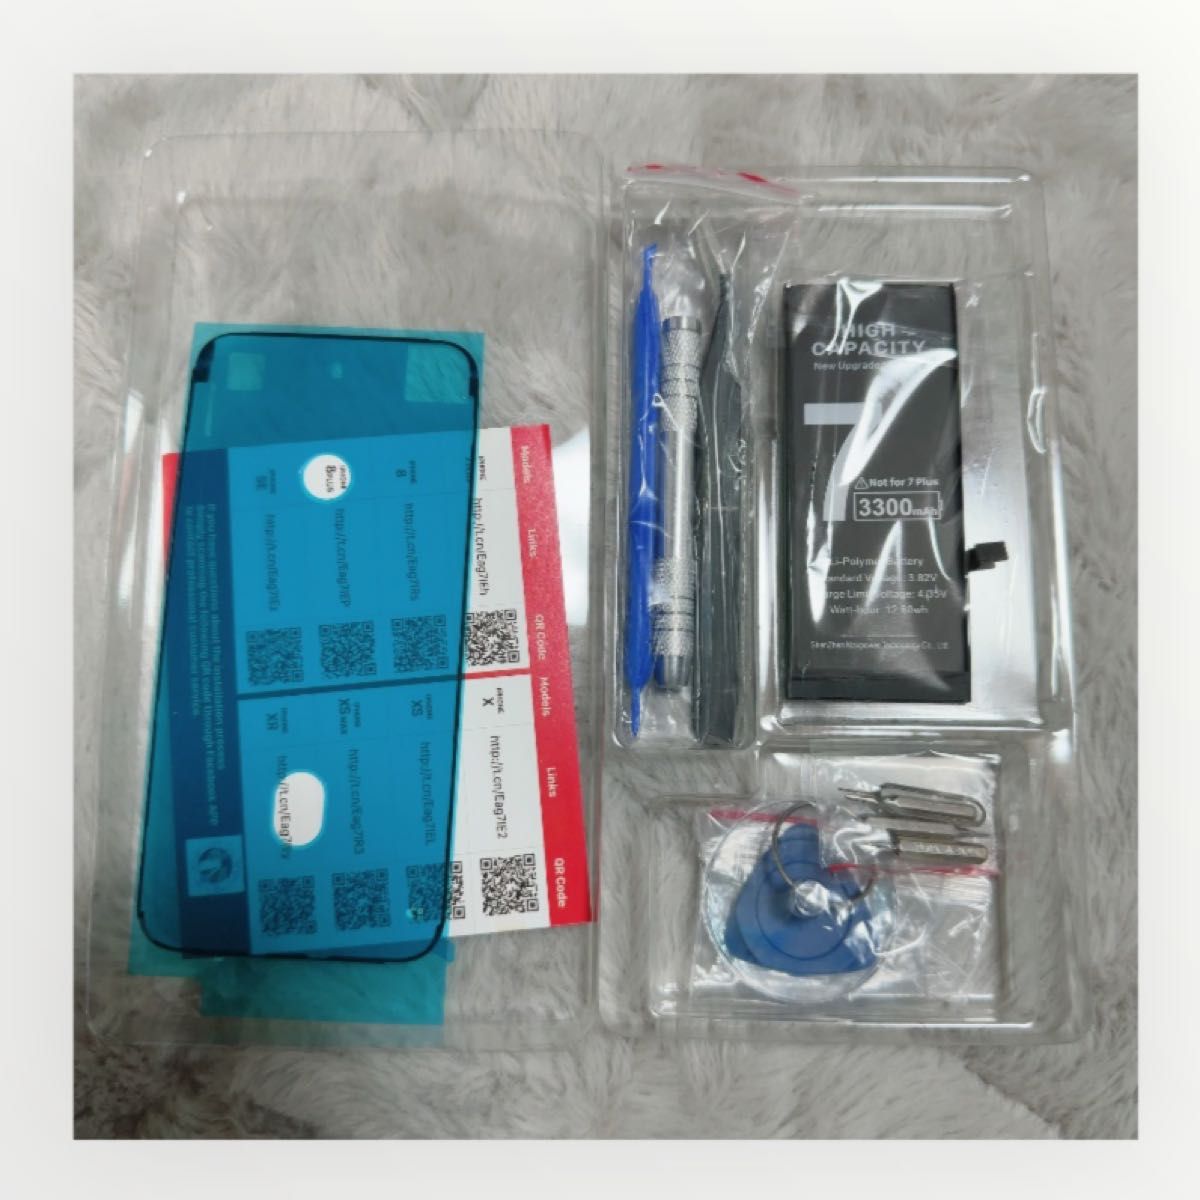 cDraFixit For iPhone 7 バッテリー 修理 交換用 